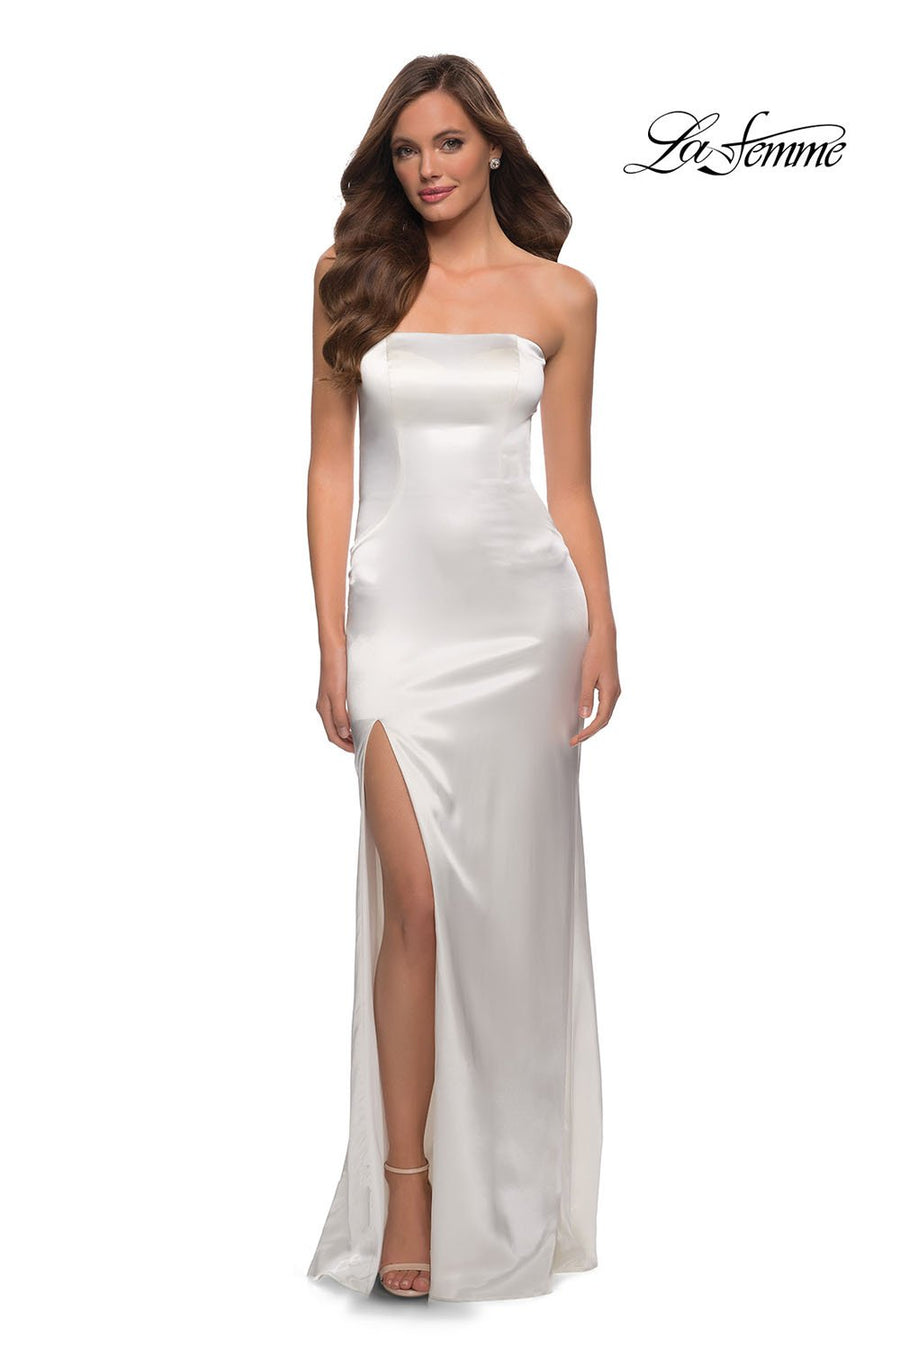 La Femme 29807 prom dress images.  La Femme 29807 is available in these colors: Black, Platinum, Red, White.